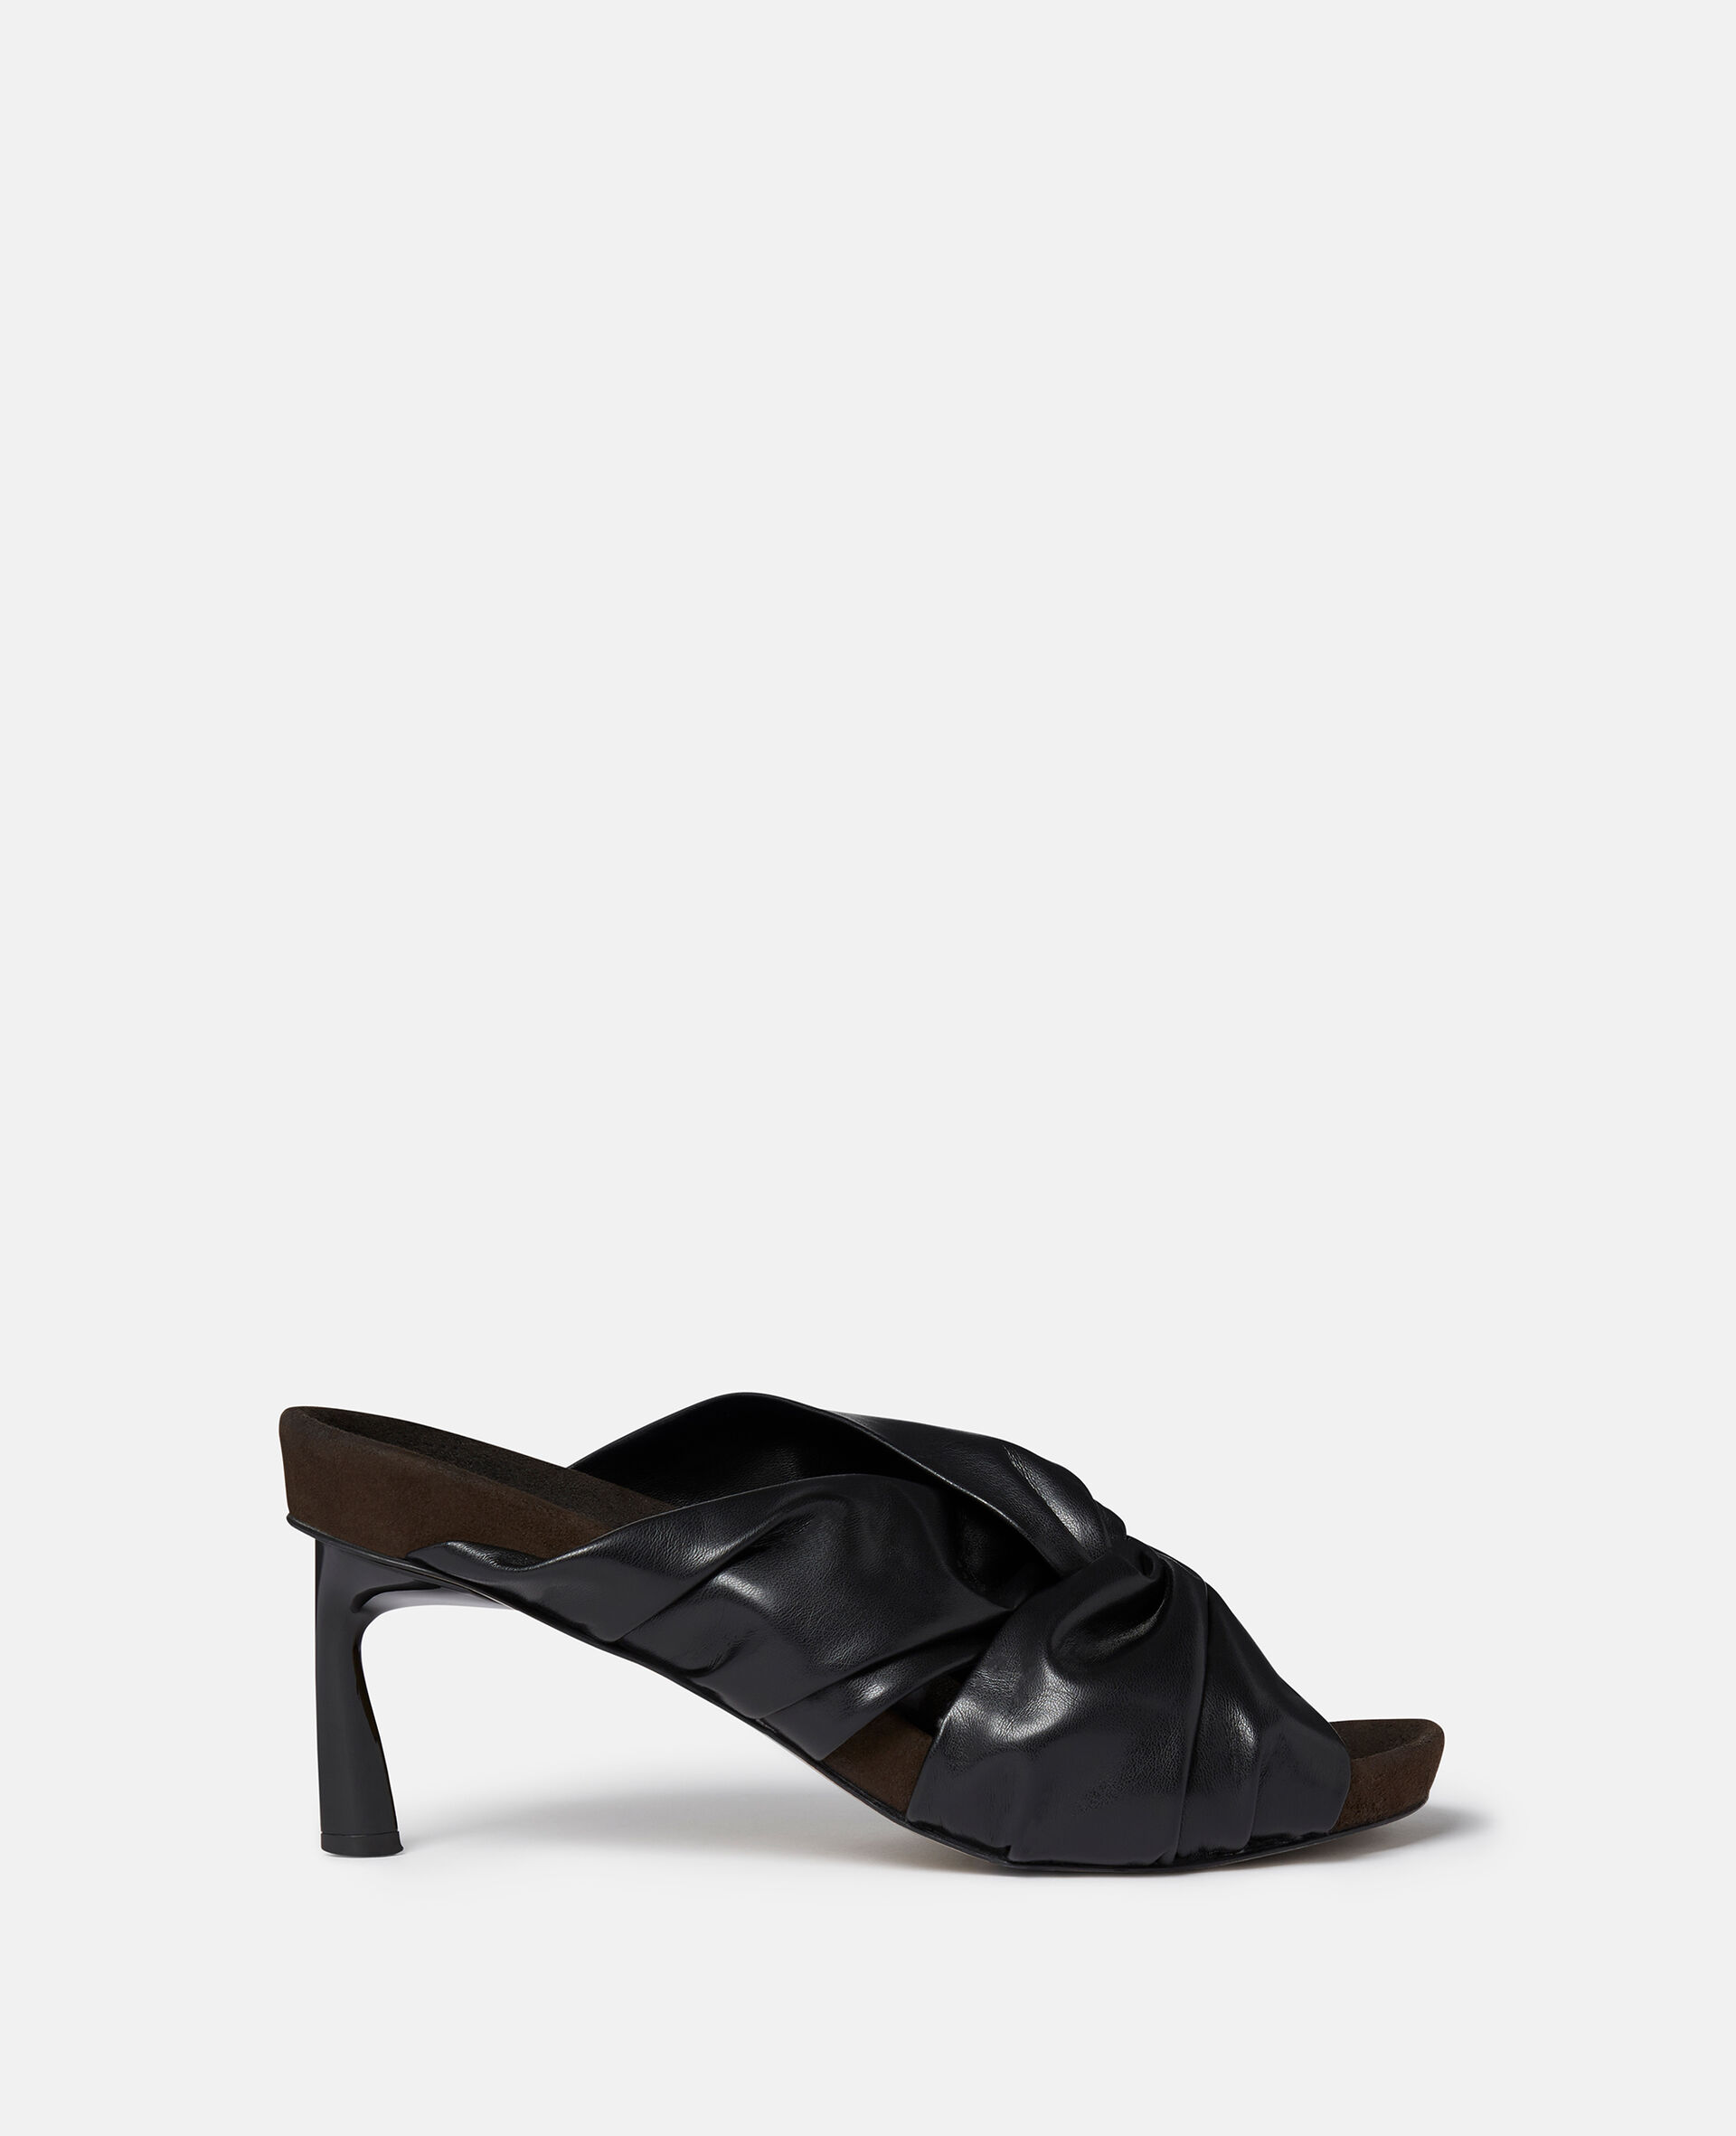 Terra Twisted Alter-Mat Mules-Black-large image number 0